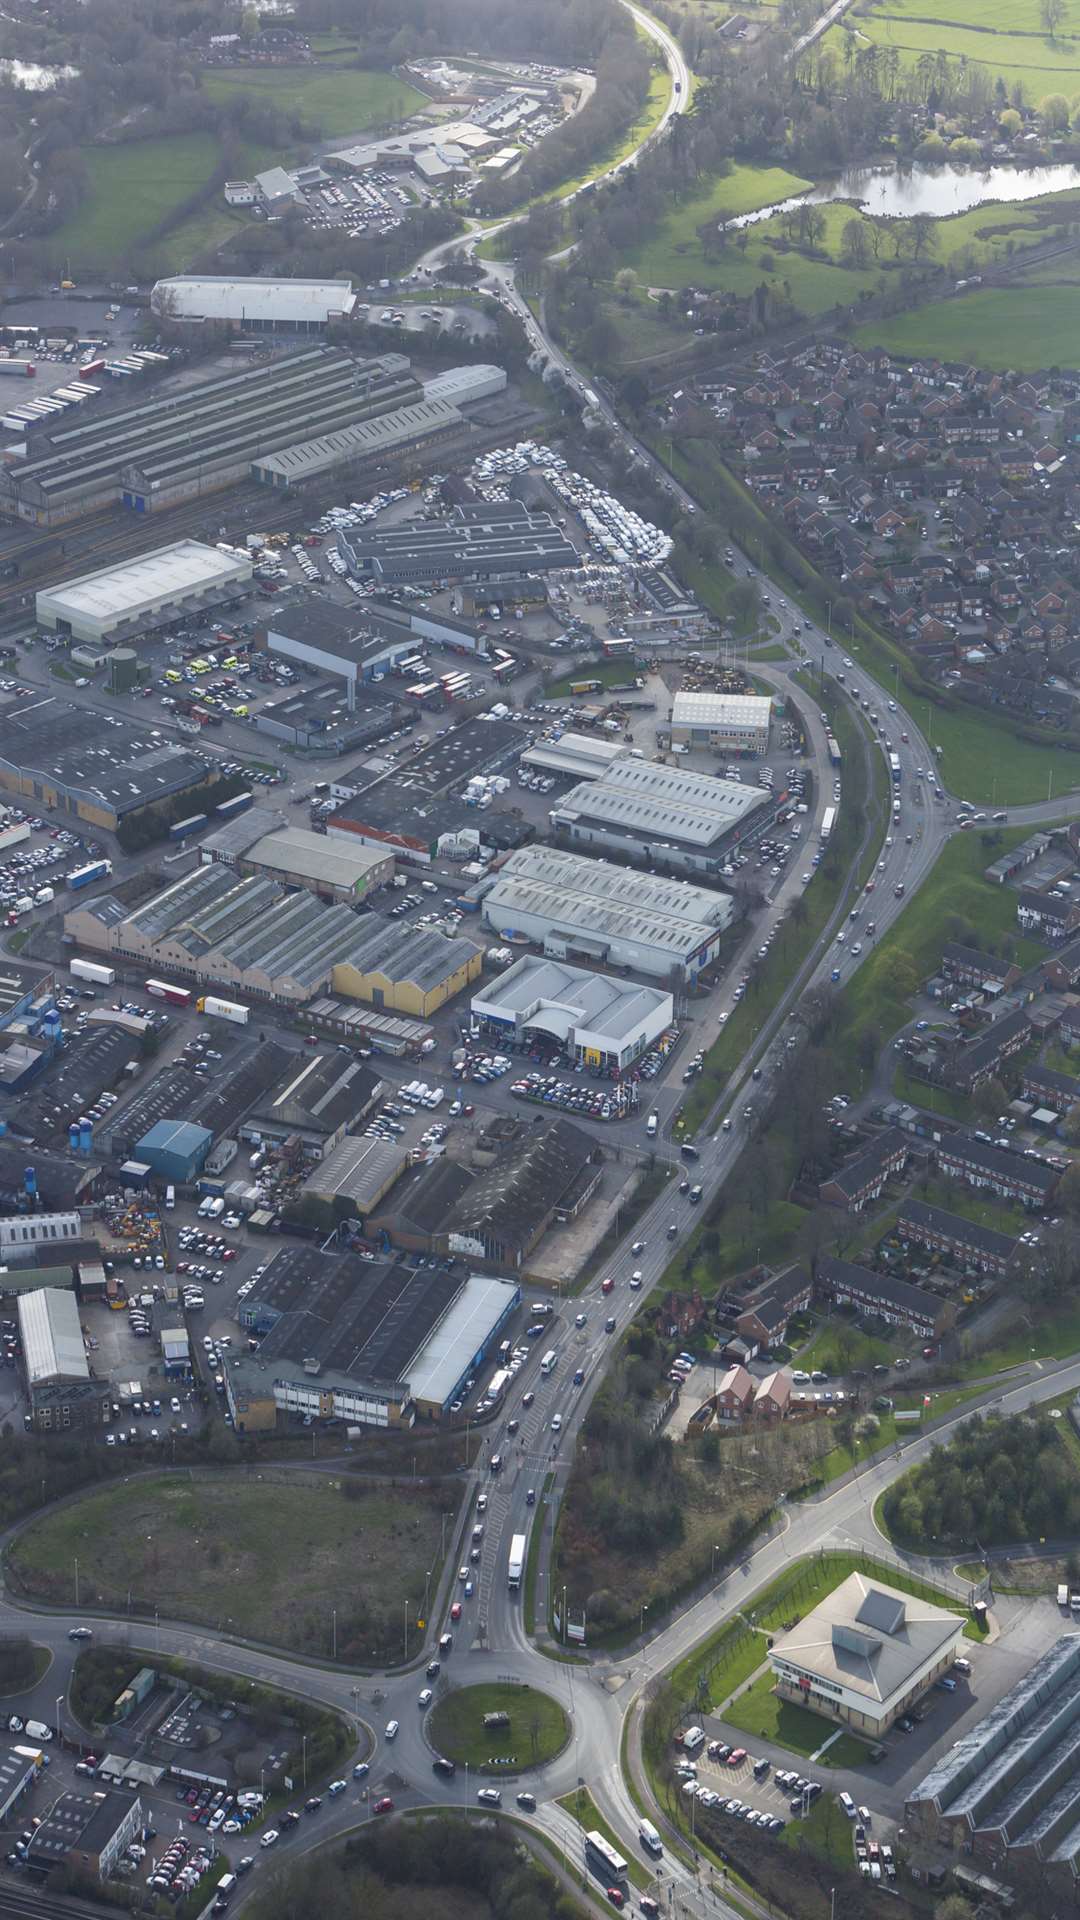 Chart Road from the tank roundabout at the bottom to the Matalan roundabout near the top. Picture courtesy of Countrywide Photographic